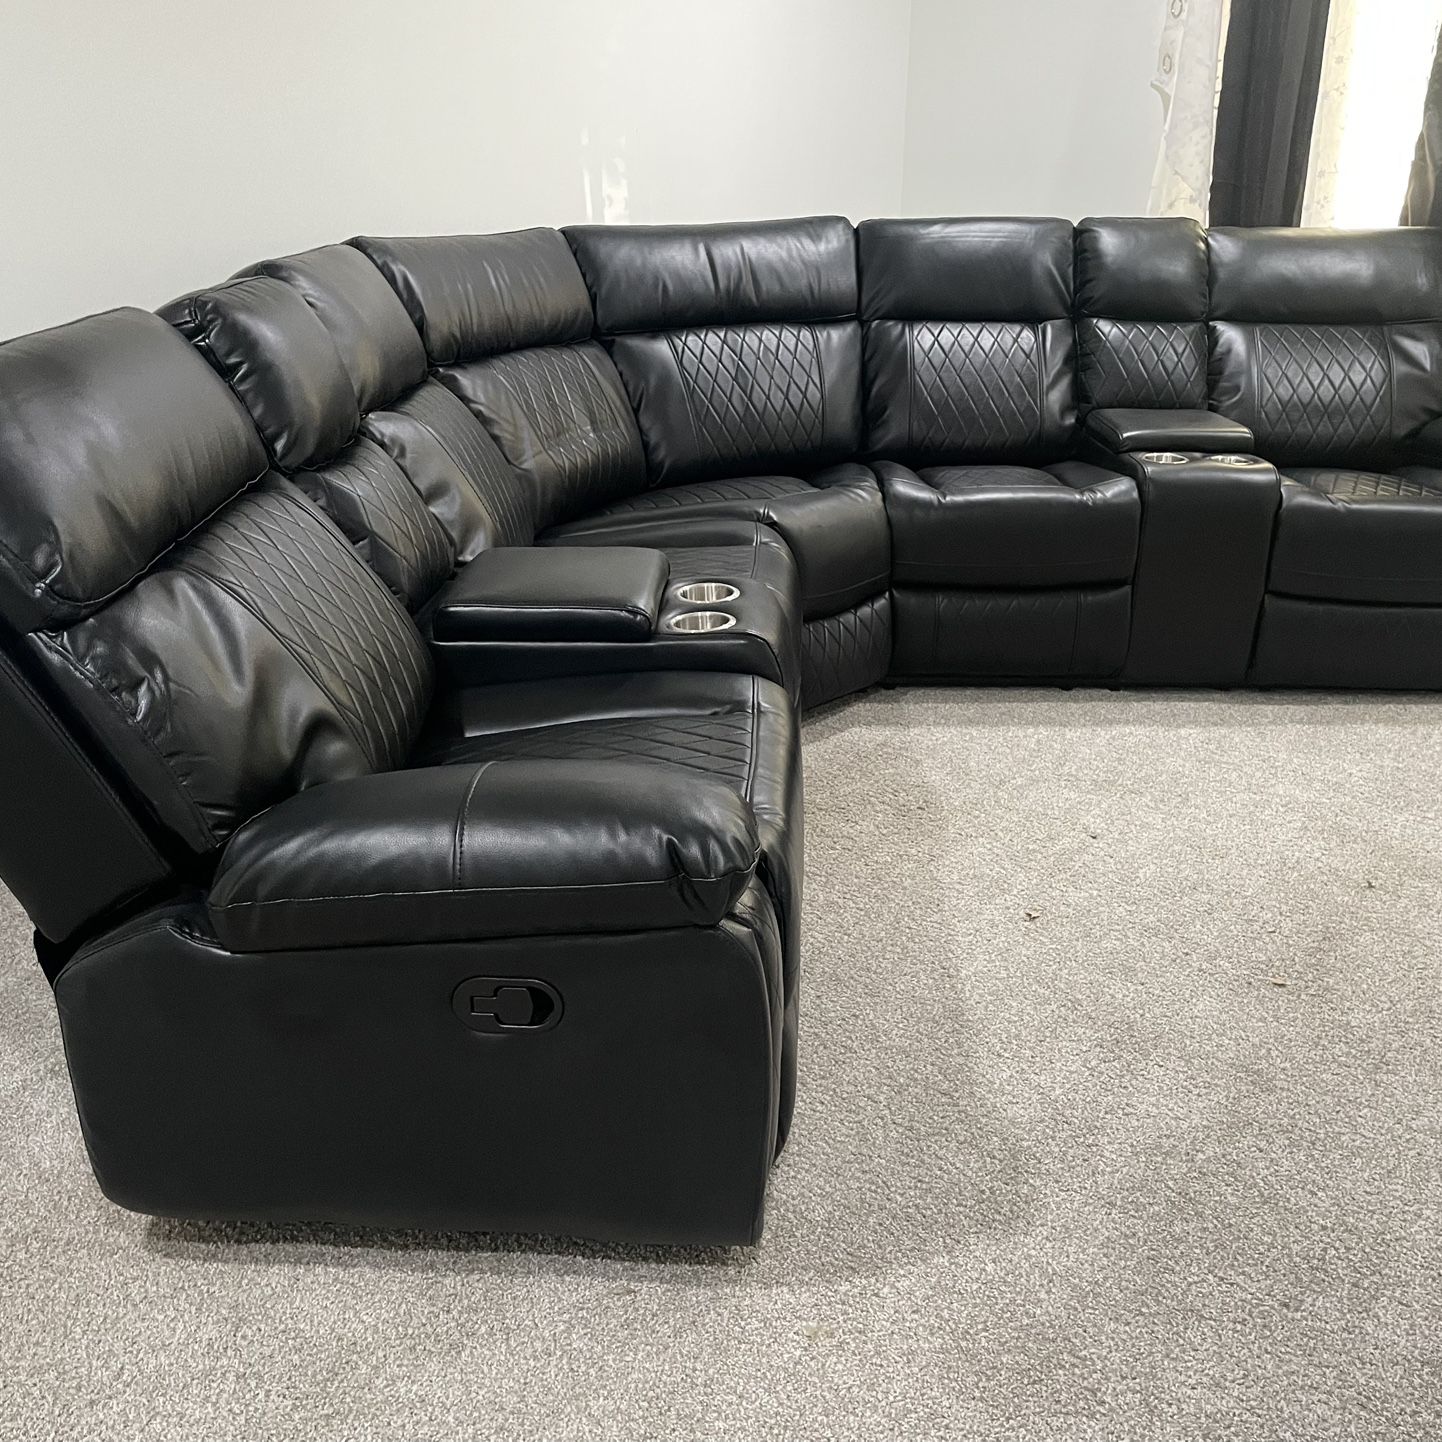 NEW GIGANTIC OVERSIZED RECLINER SECTIONAL  $1525 INCLUDING DELIVERY !!!